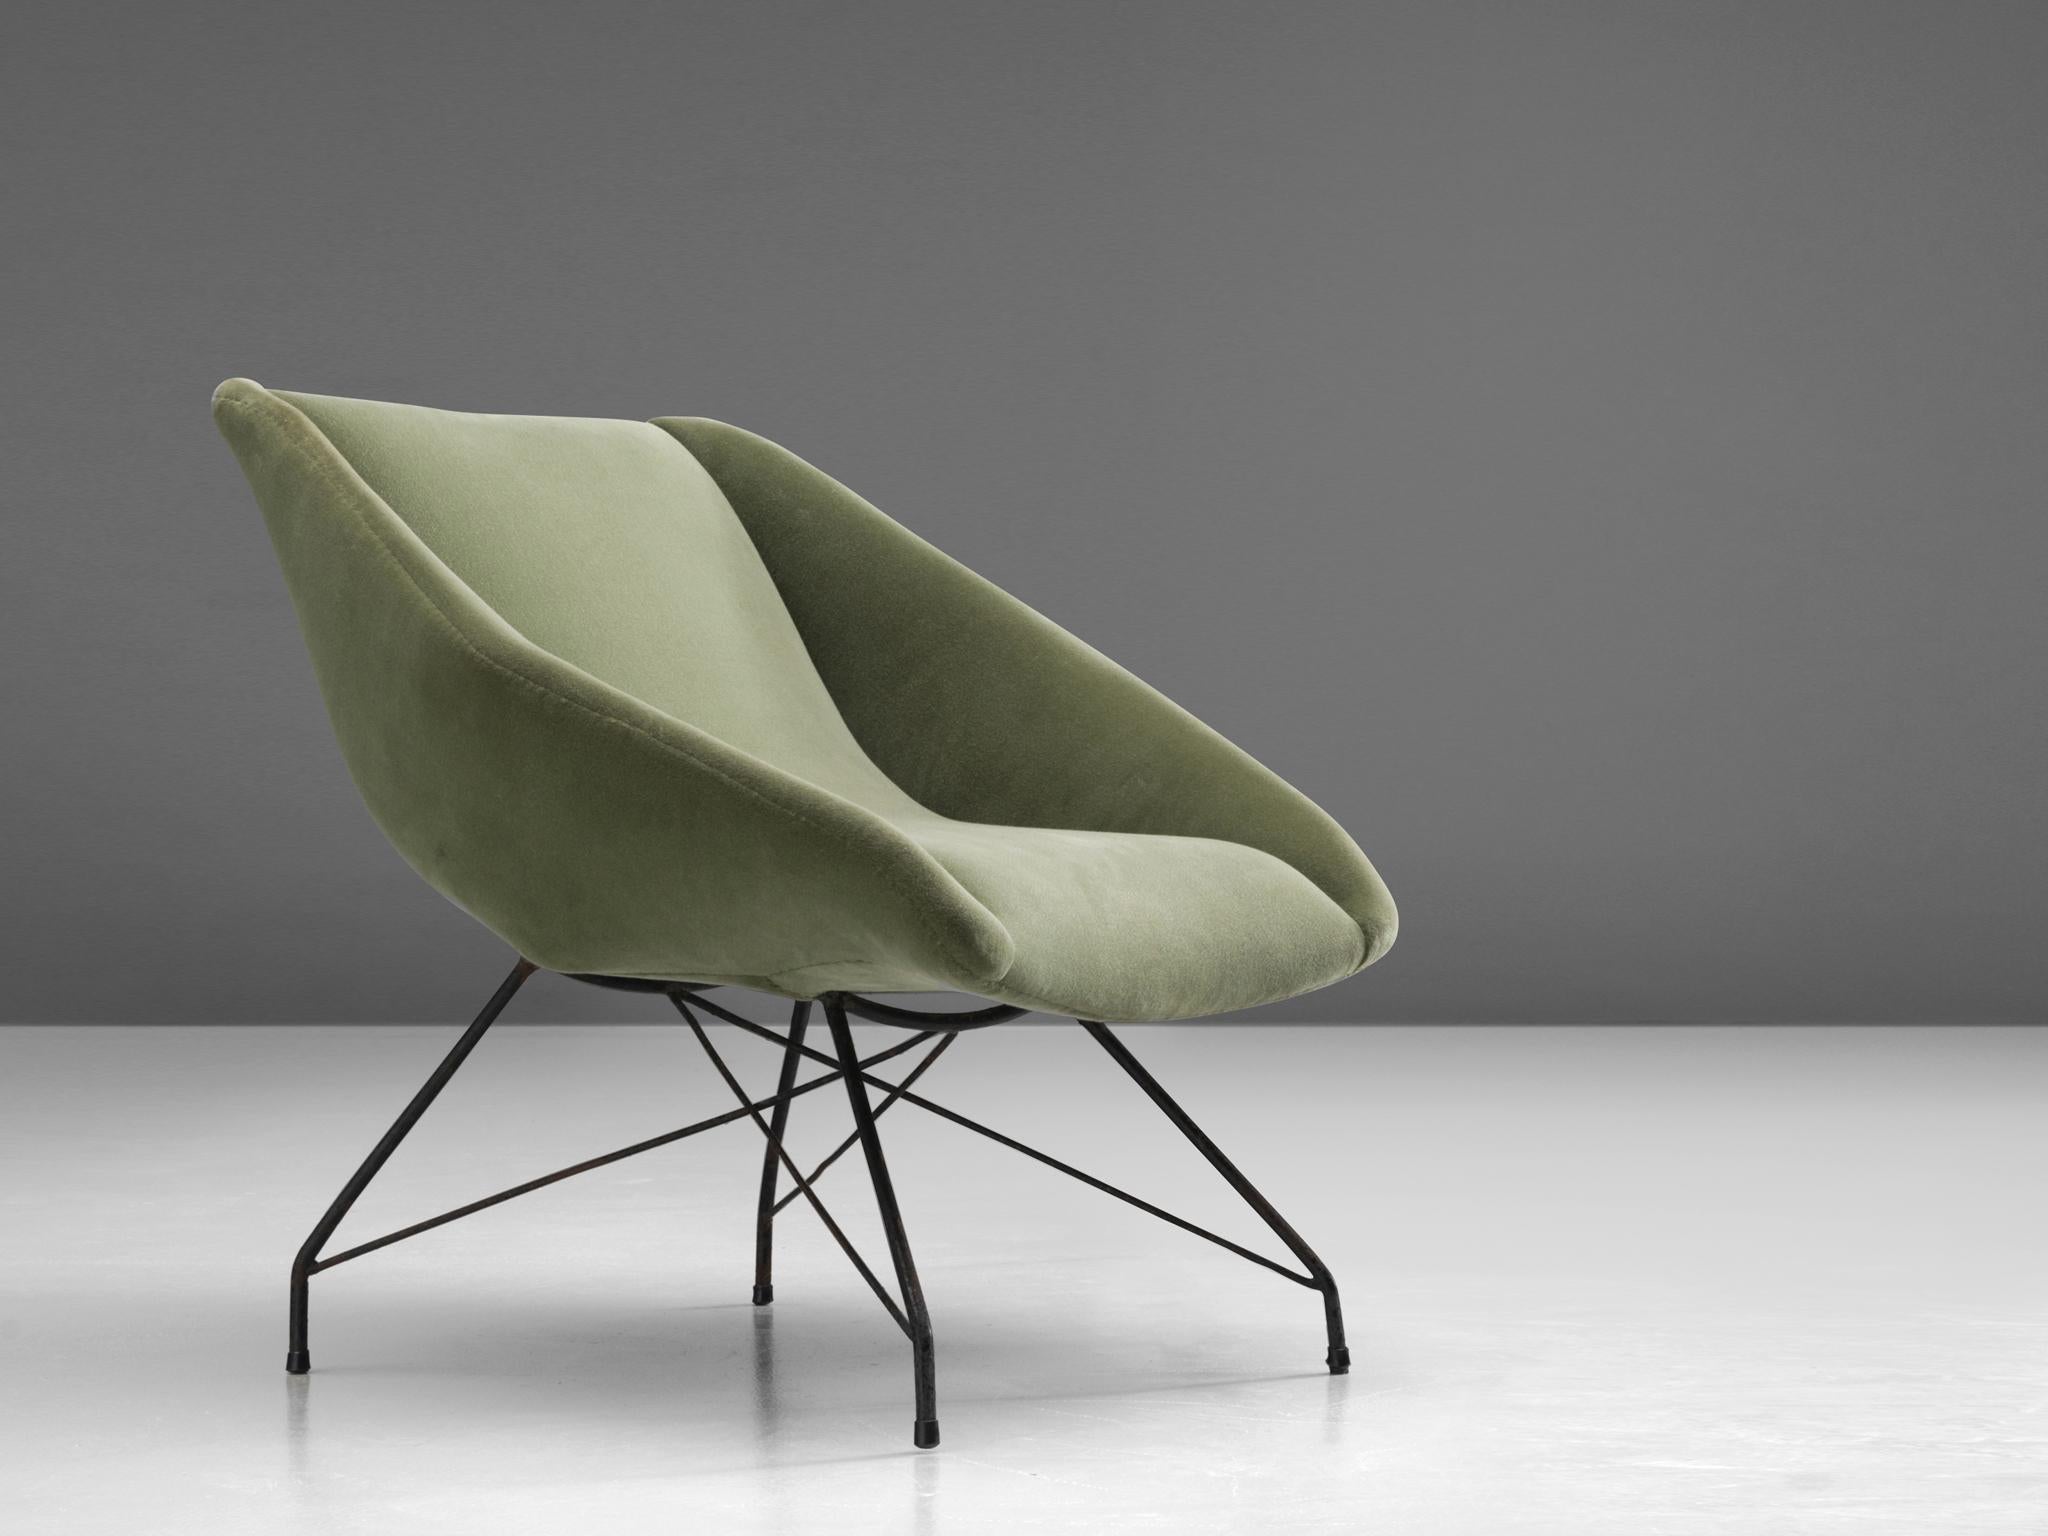 Carlo Hauner and Martin Eisler for Forma, lounge chair, iron and green velvet fabric, Brazil, 1950s

Elegant and modern armchair by Brazilian designer duo Hauner & Eisler. The thin, elegant frame is made in black painted iron. Due the diagonal